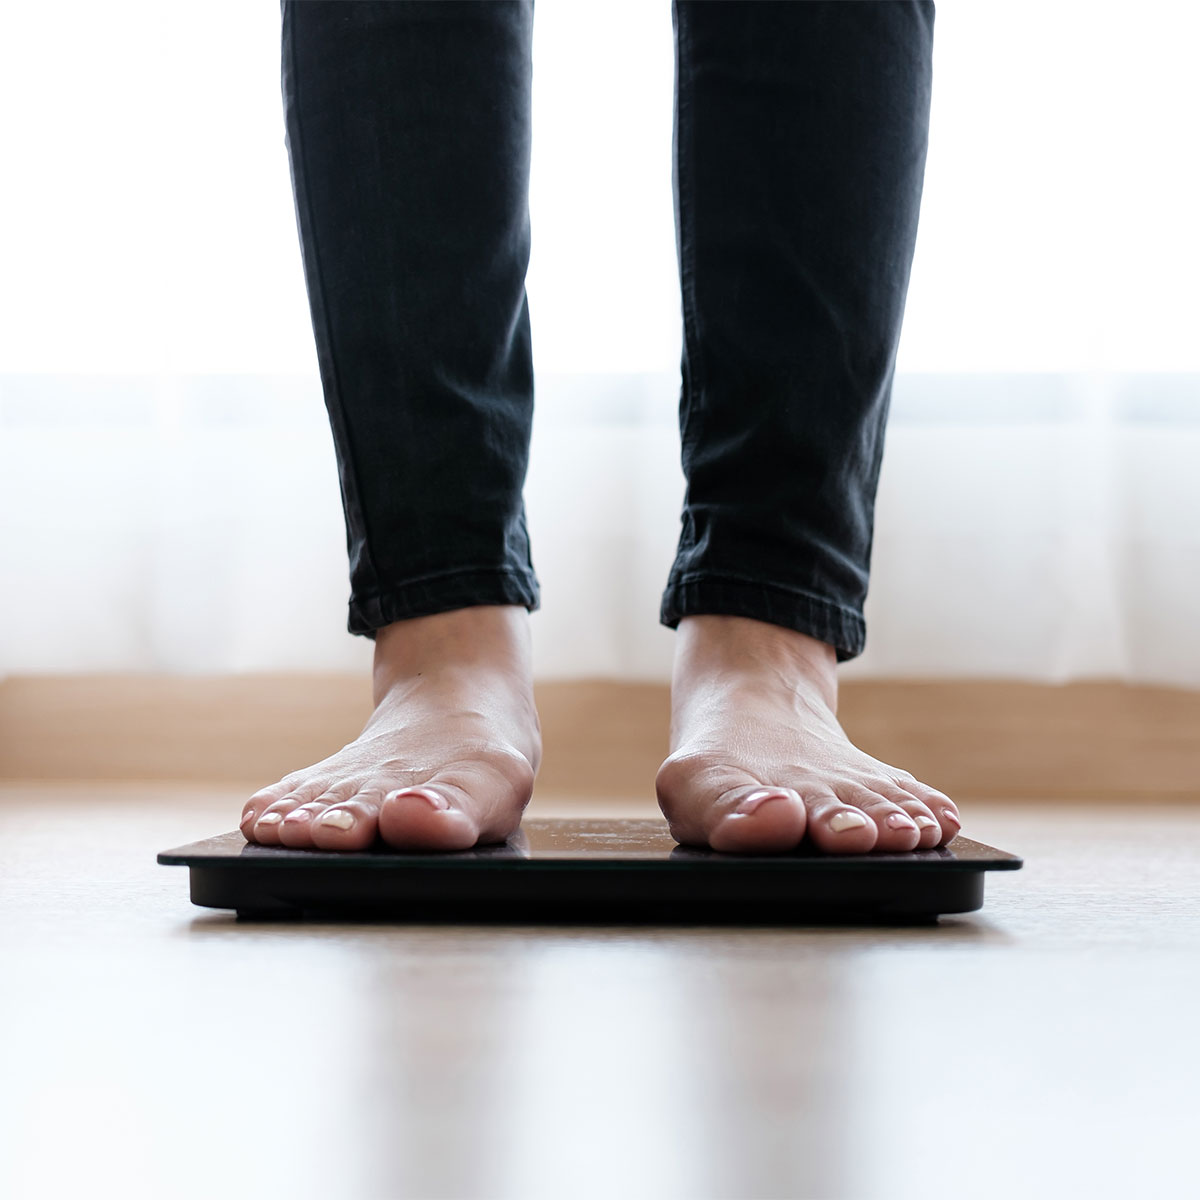 woman standing on scale with bare feet